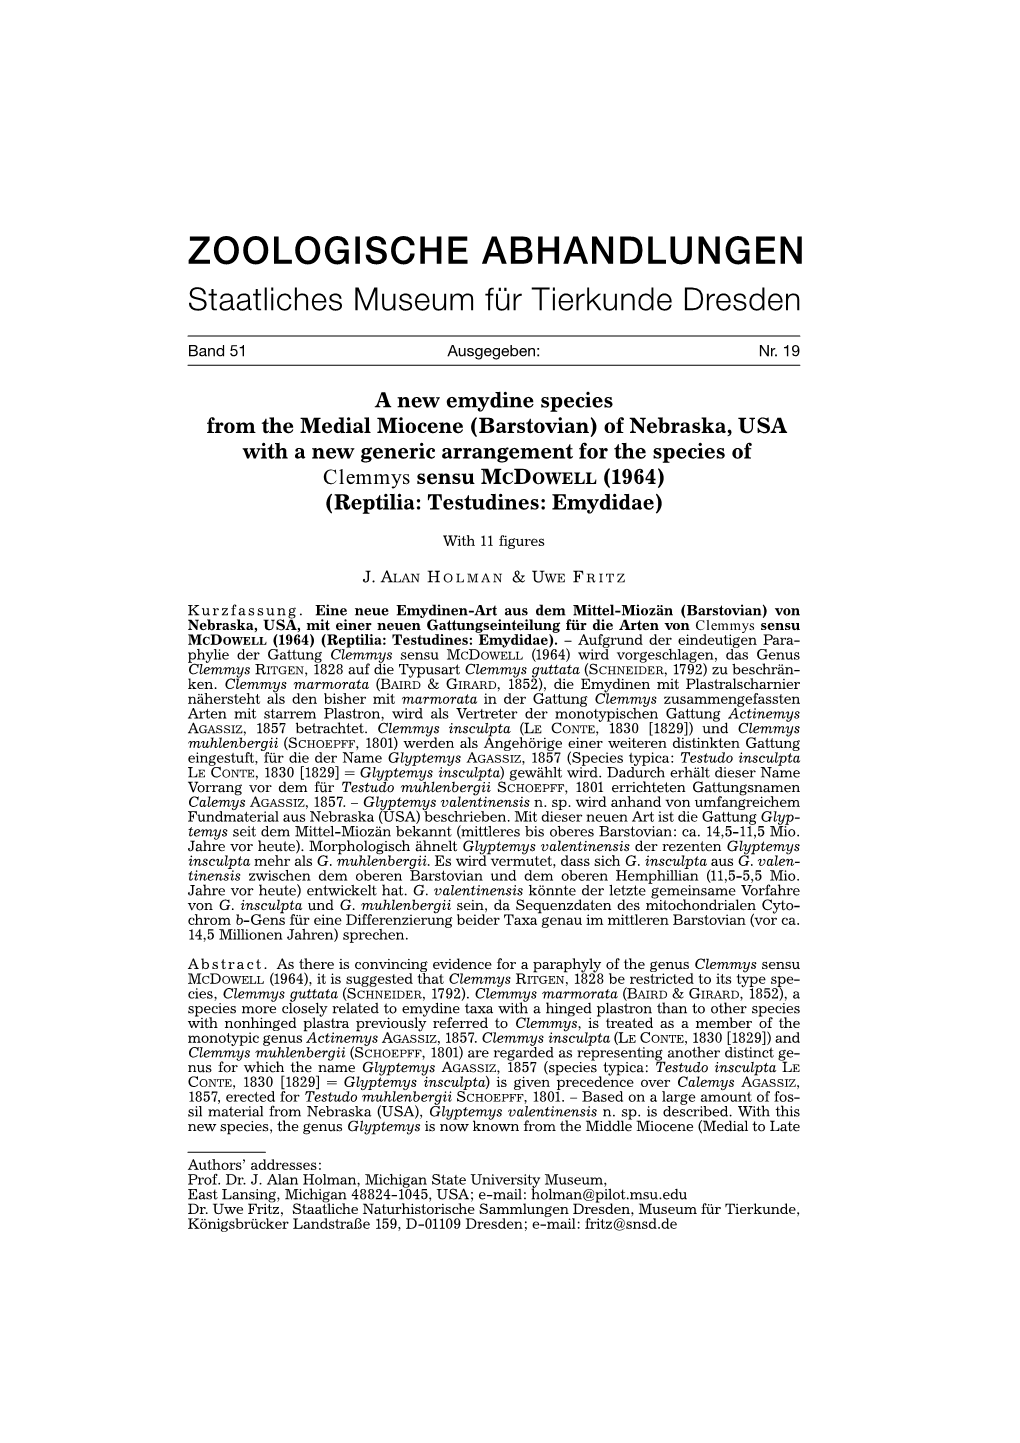 Holman, J.A. and Fritz, U. 2001. a New Emydine Species from the Middle Miocene